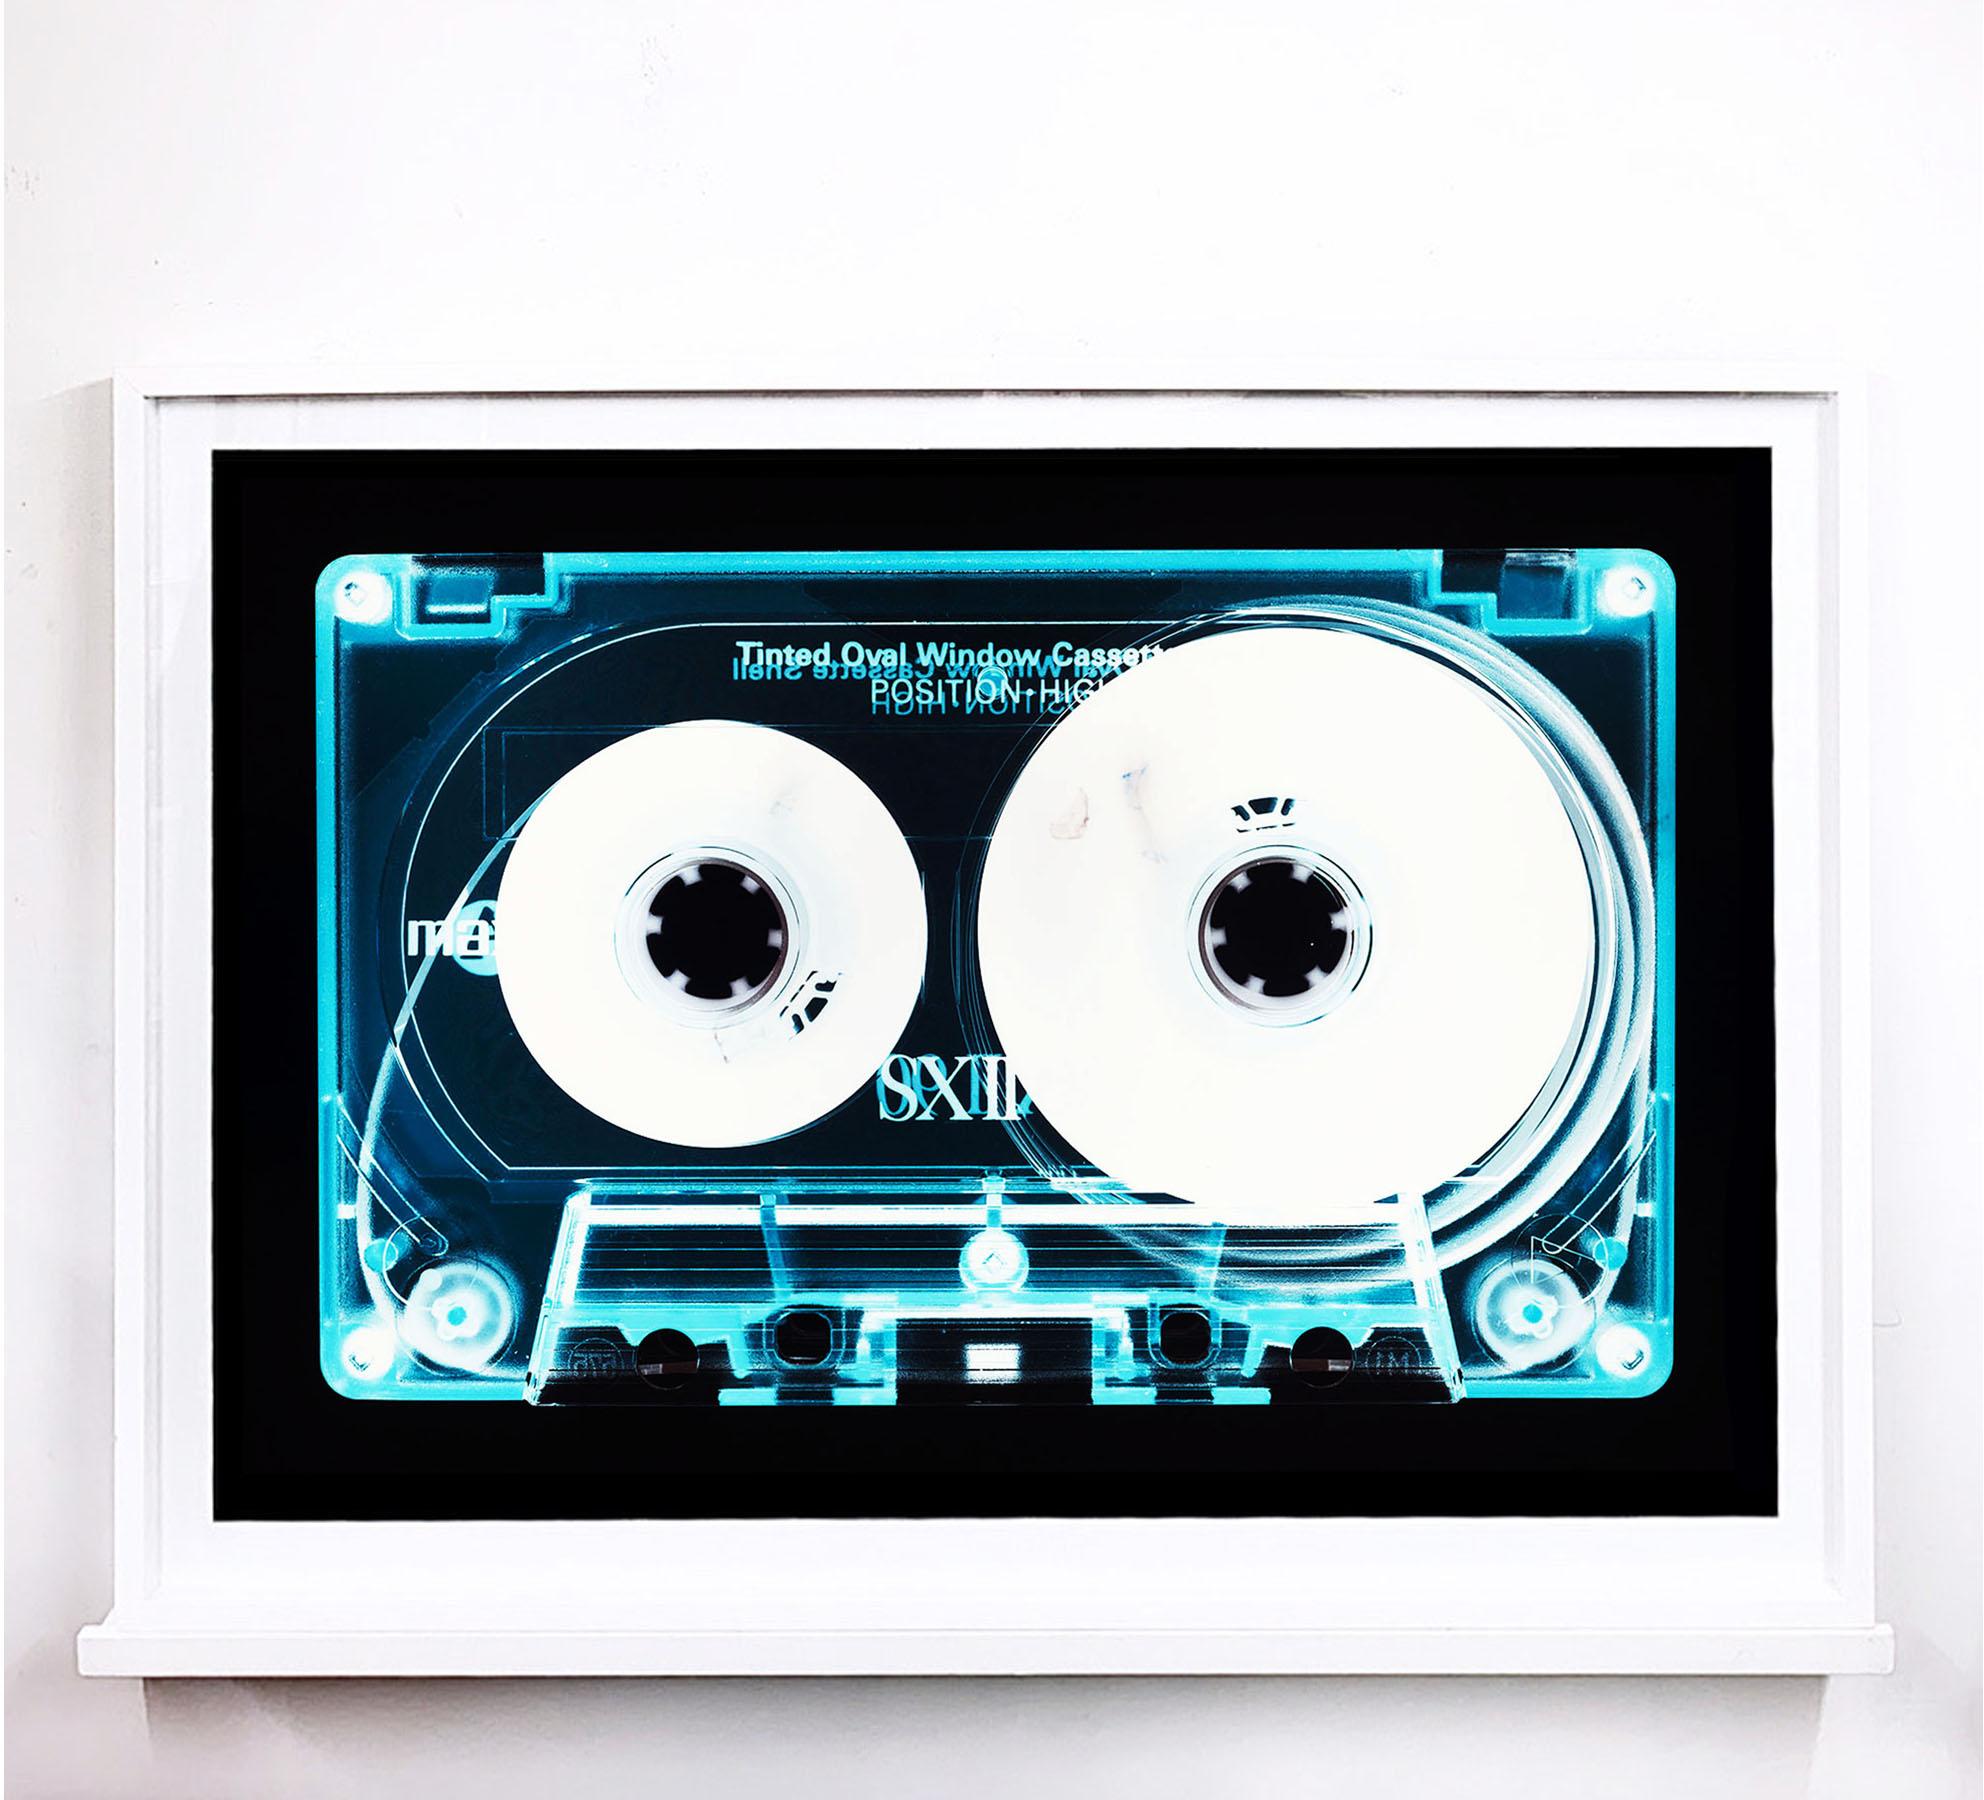 Tape Collection, Tinted Oval Window Cassette - Contemporary Pop Art Color Photo - Print by Heidler & Heeps